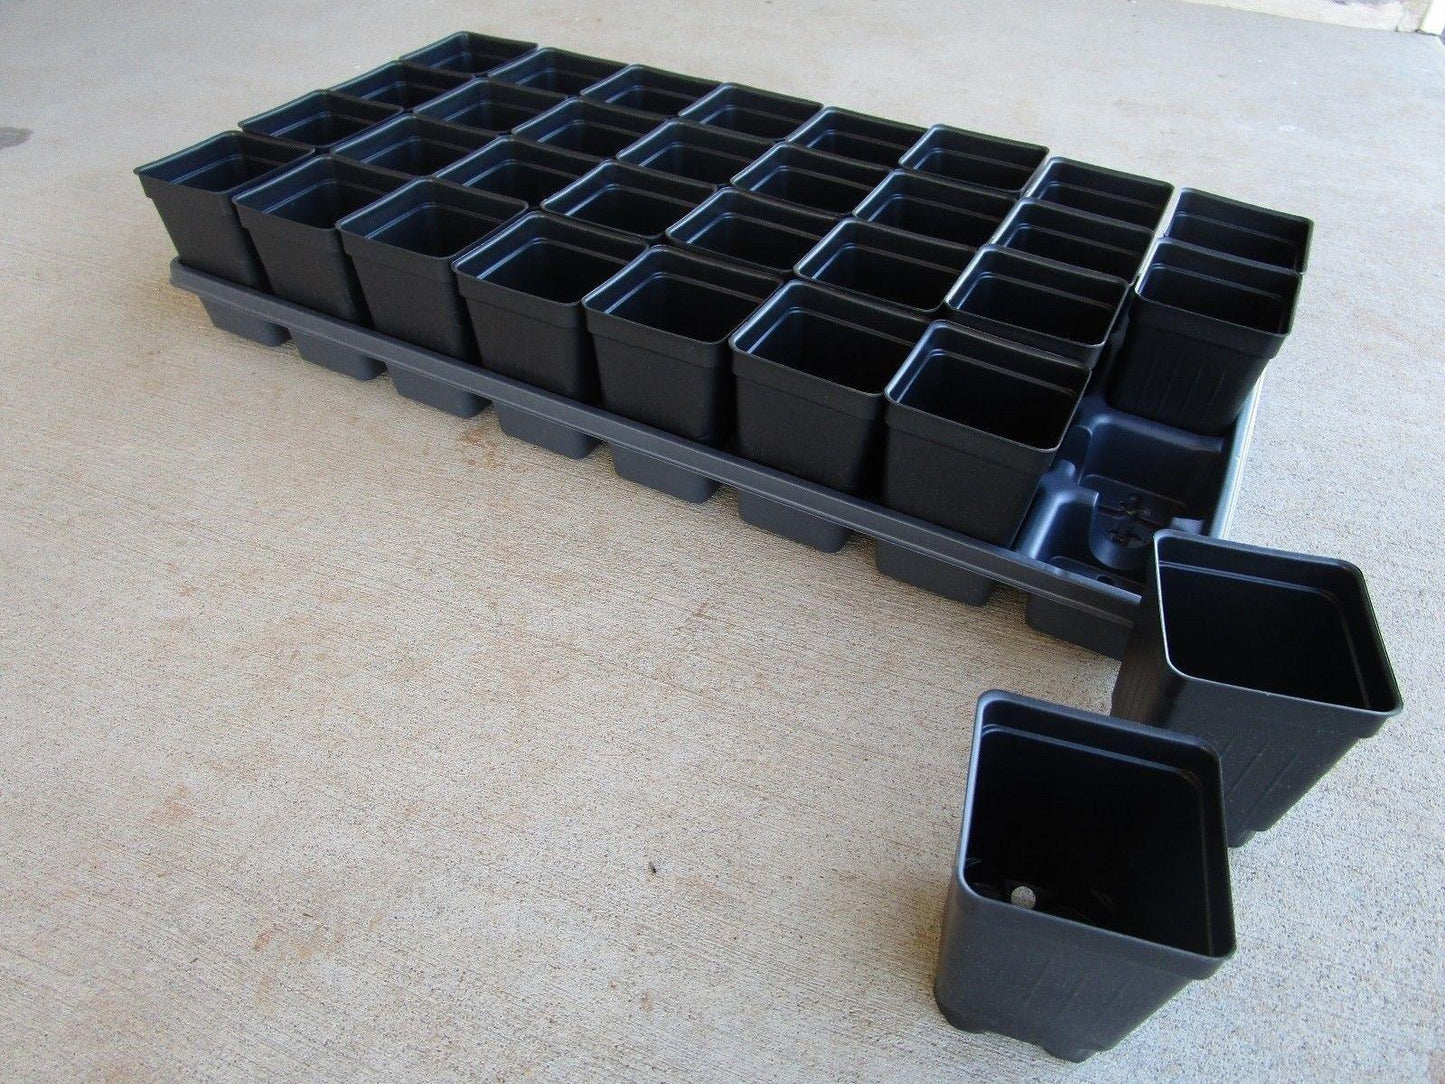 Set of 3 Divided Trays and 96 - 2.5 Inch Square Deep Nursery Pots